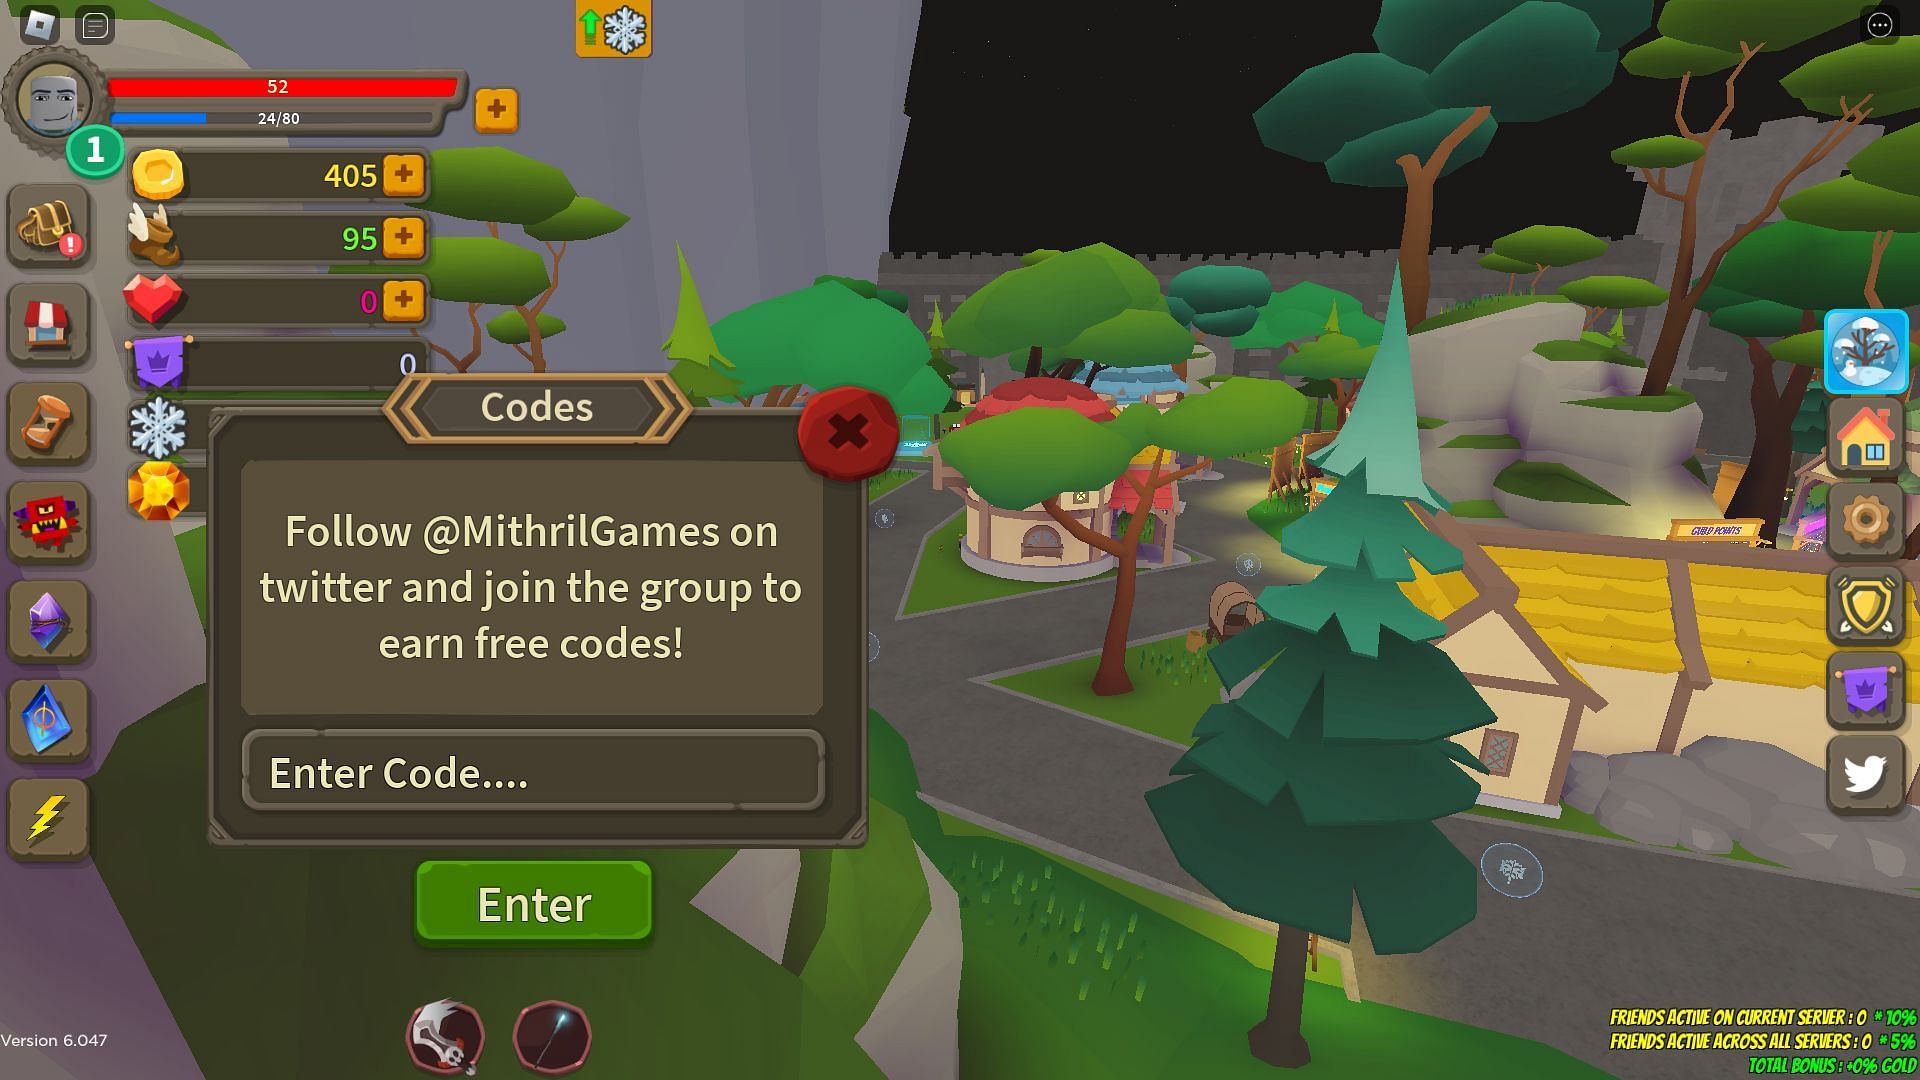 Active codes for Giant Simulator (Image via Roblox)